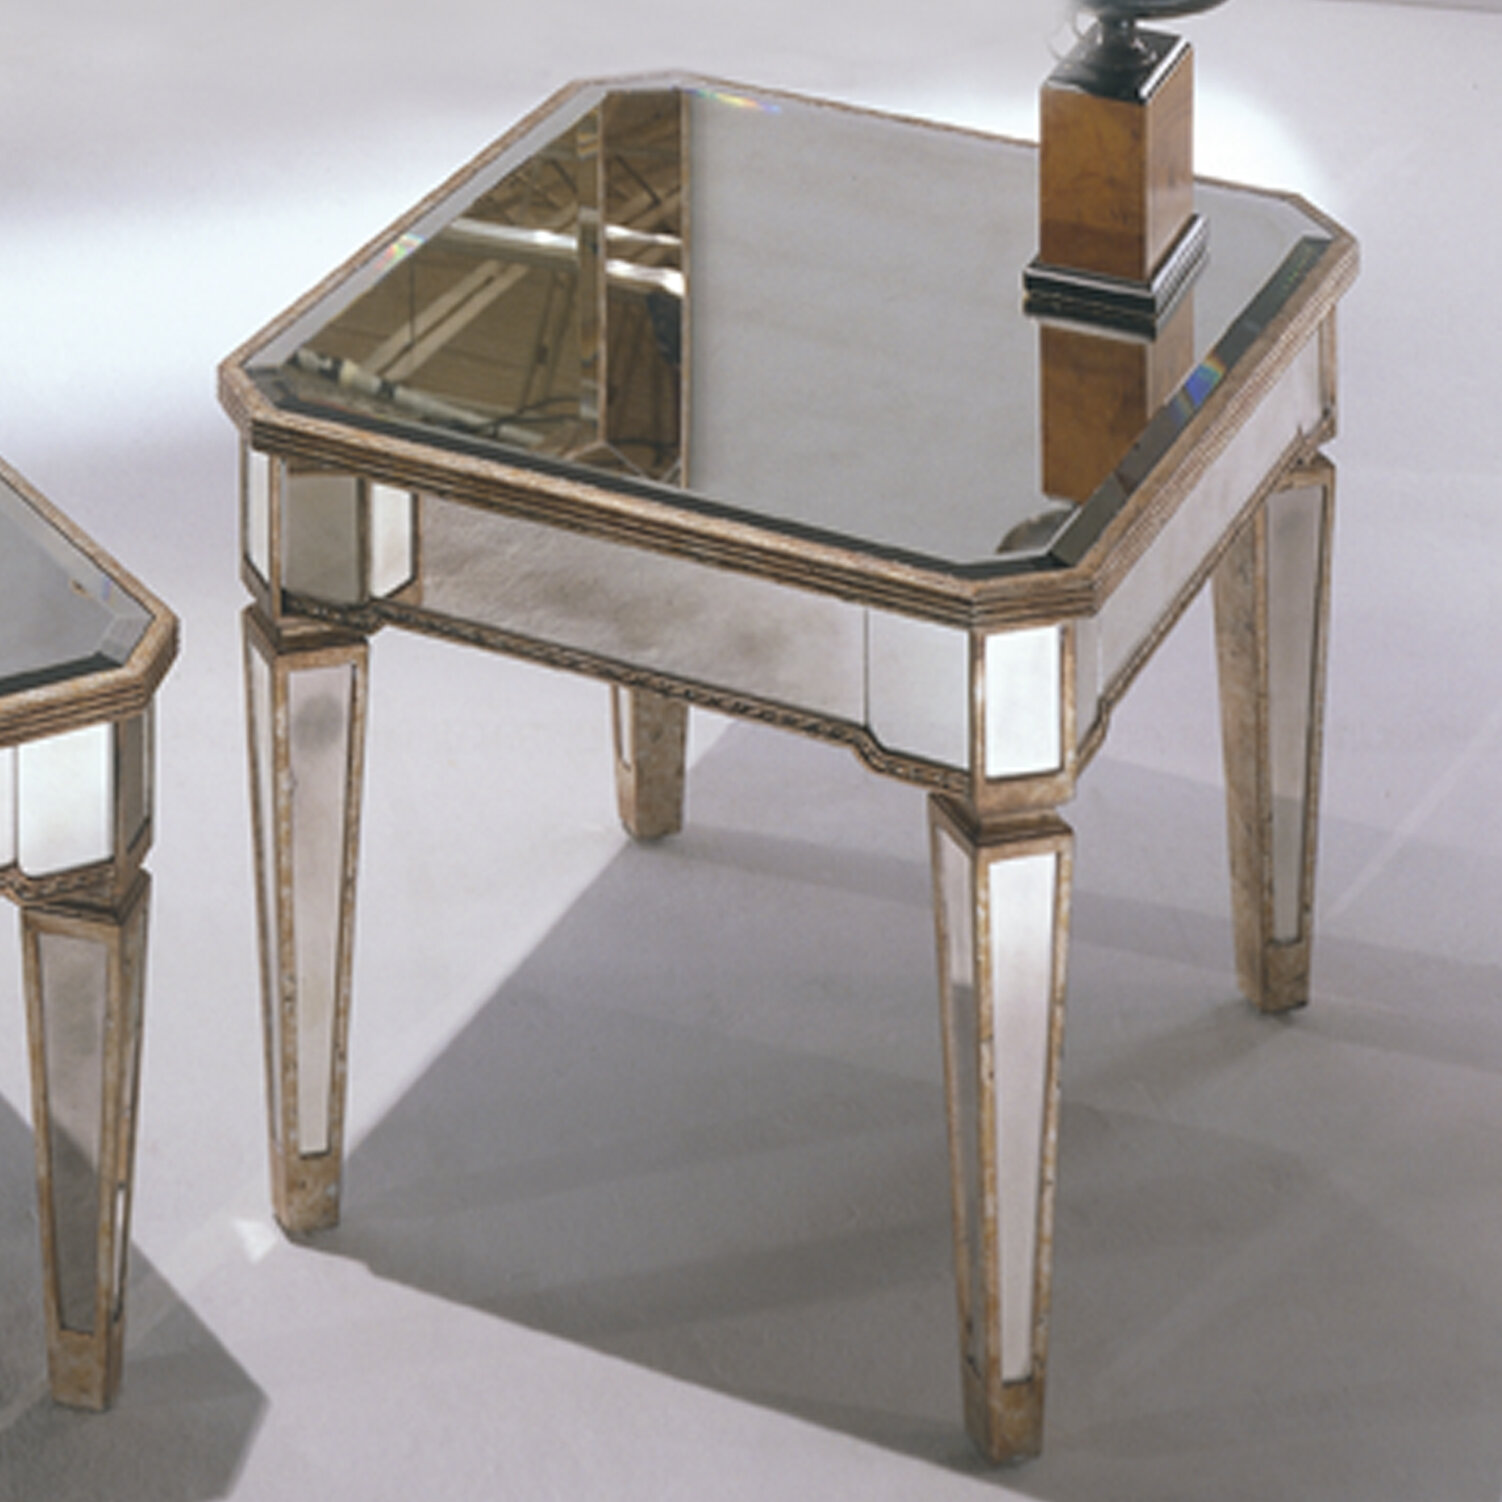 Willa Arlo Interiors Roehl Mirrored End Table In Antique Silver Wayfair